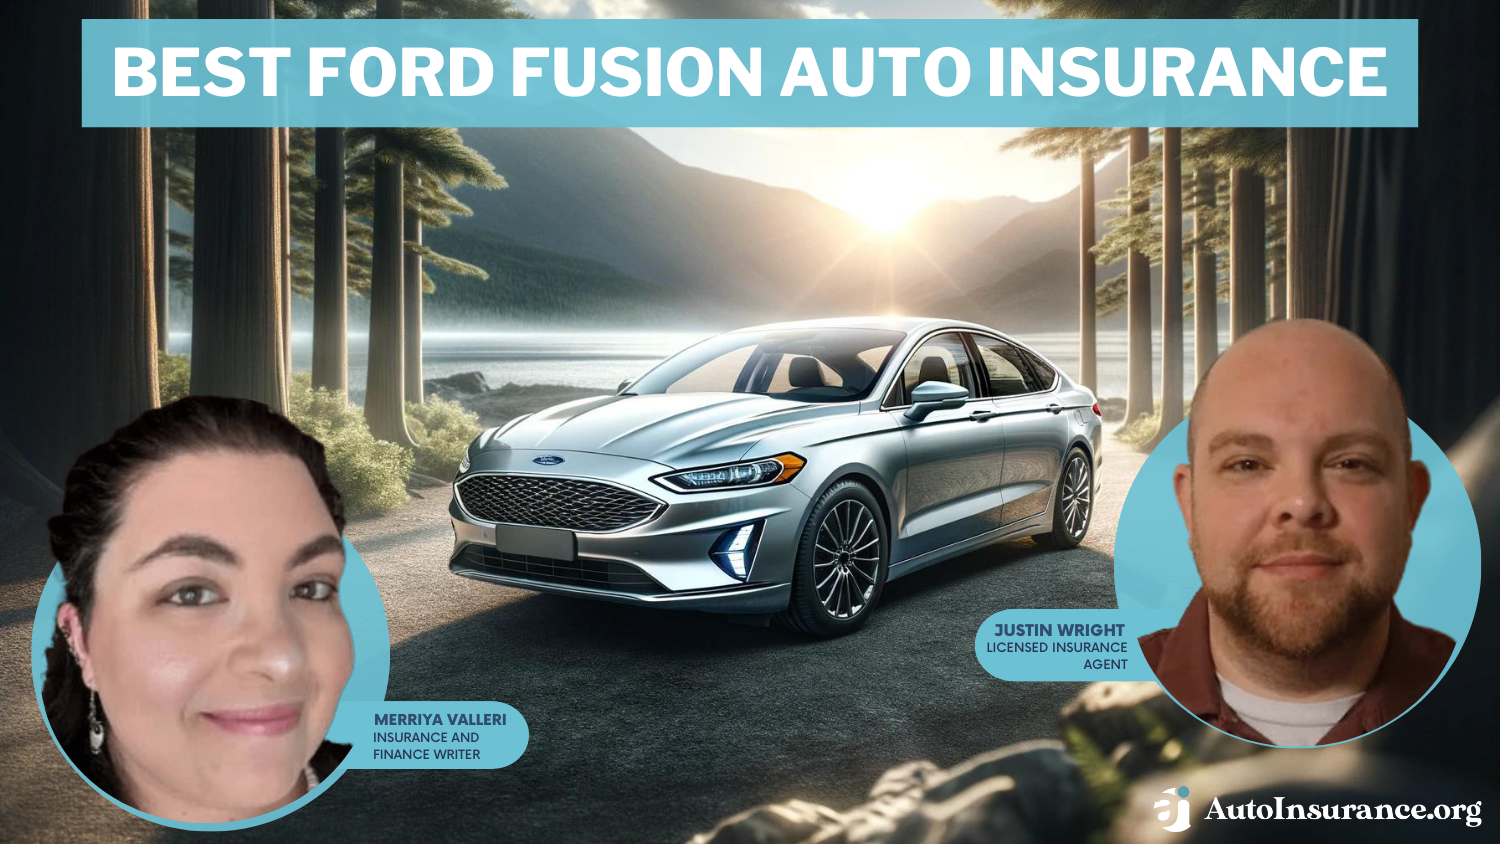 Best Ford Fusion Auto Insurance: State Farm, USAA, Travelers